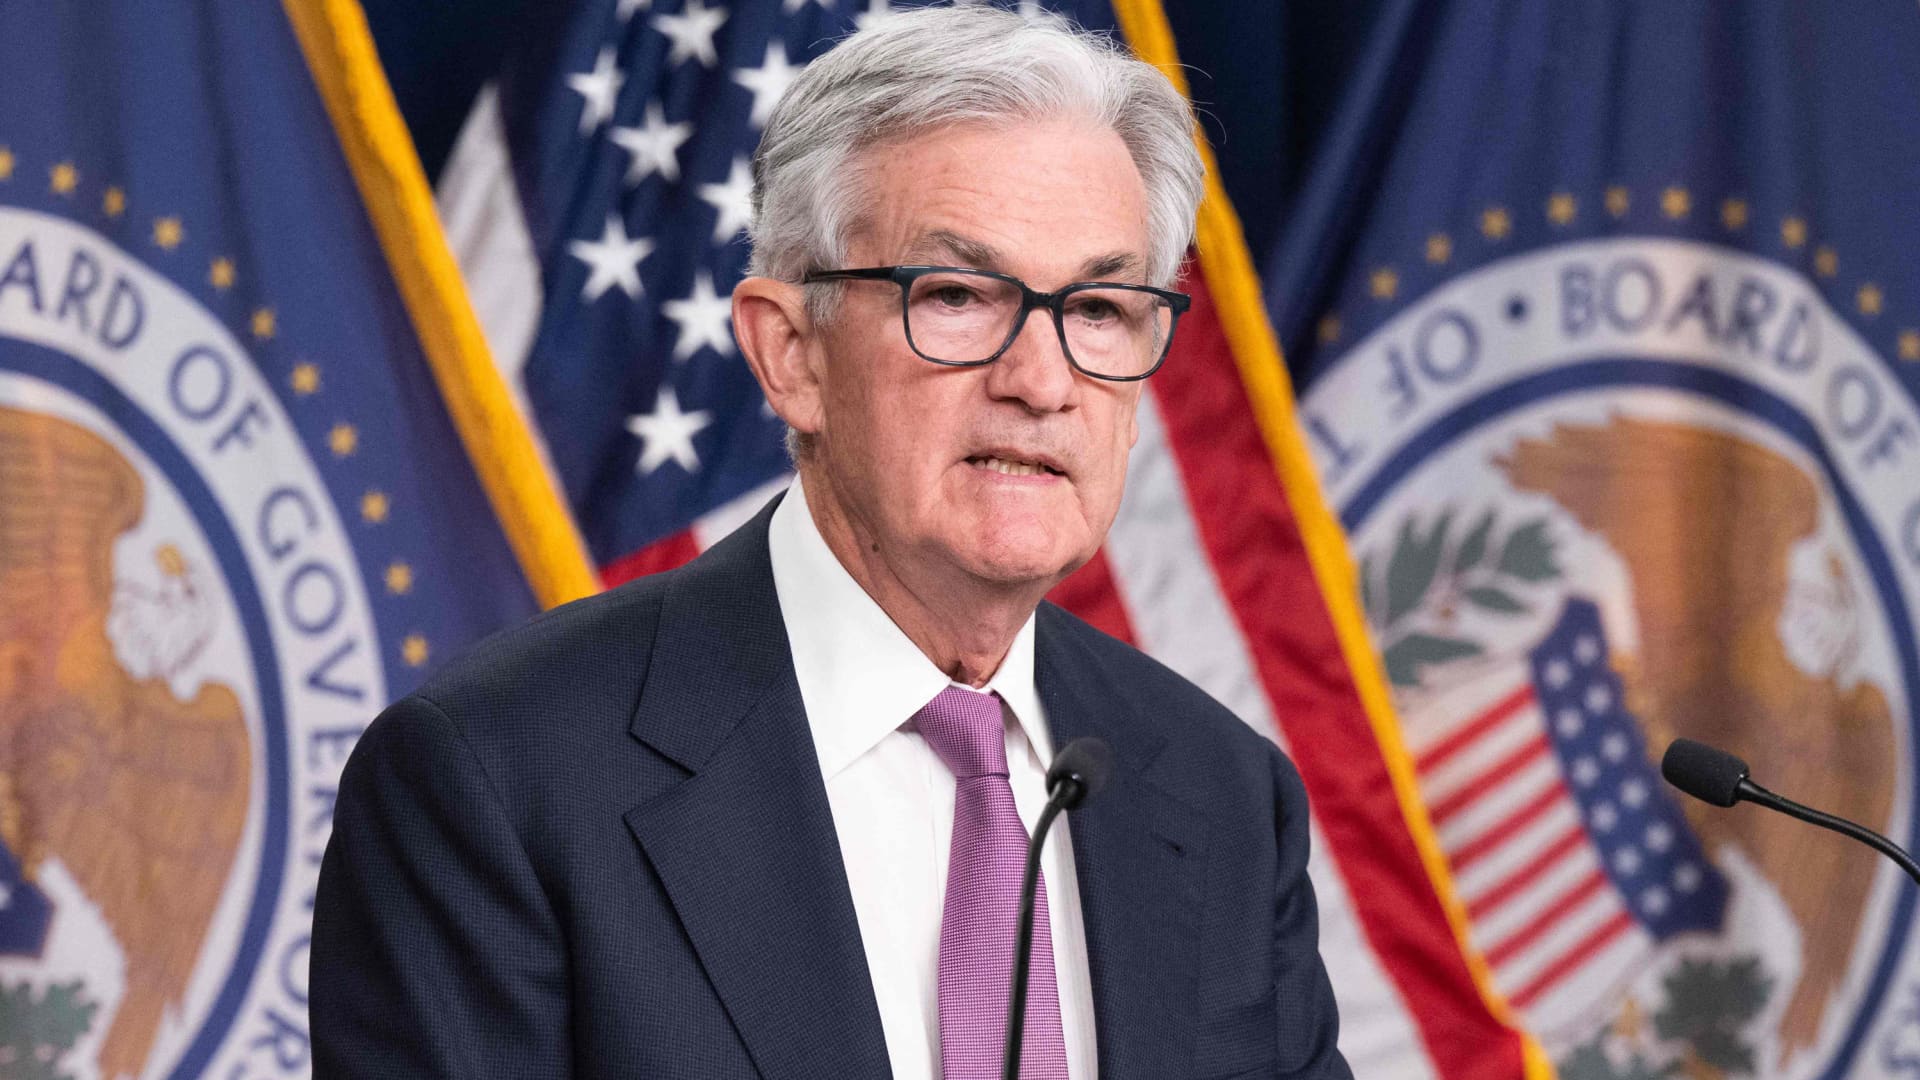 Observe Federal Reserve Chair Jerome Powell examine inflation, fascination prices and the financial state